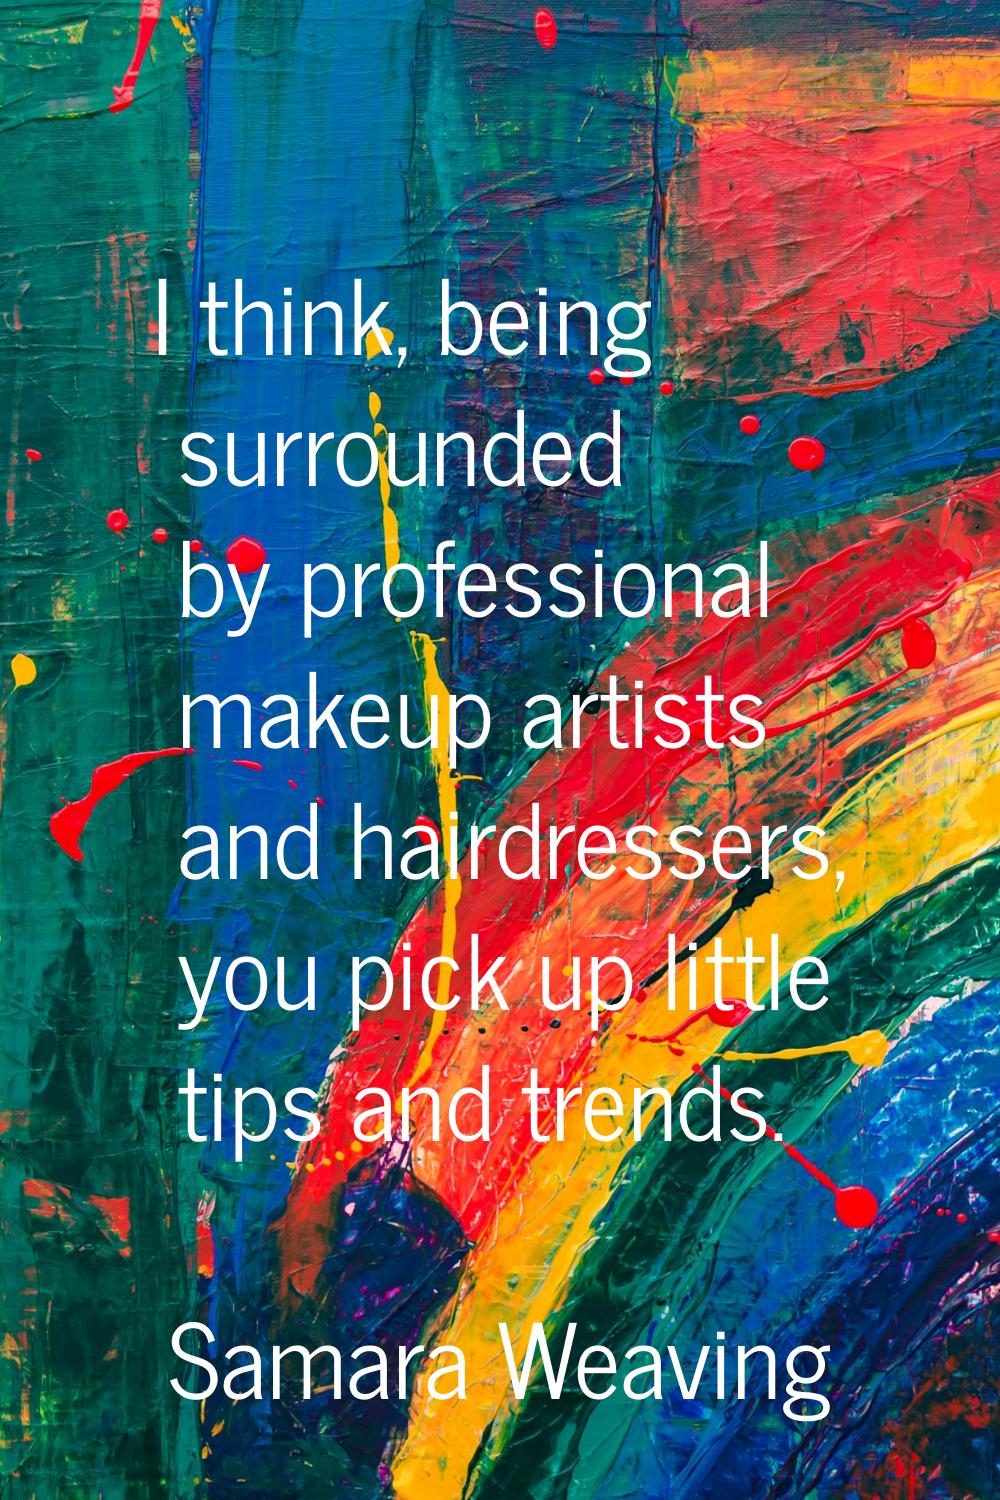 I think, being surrounded by professional makeup artists and hairdressers, you pick up little tips 